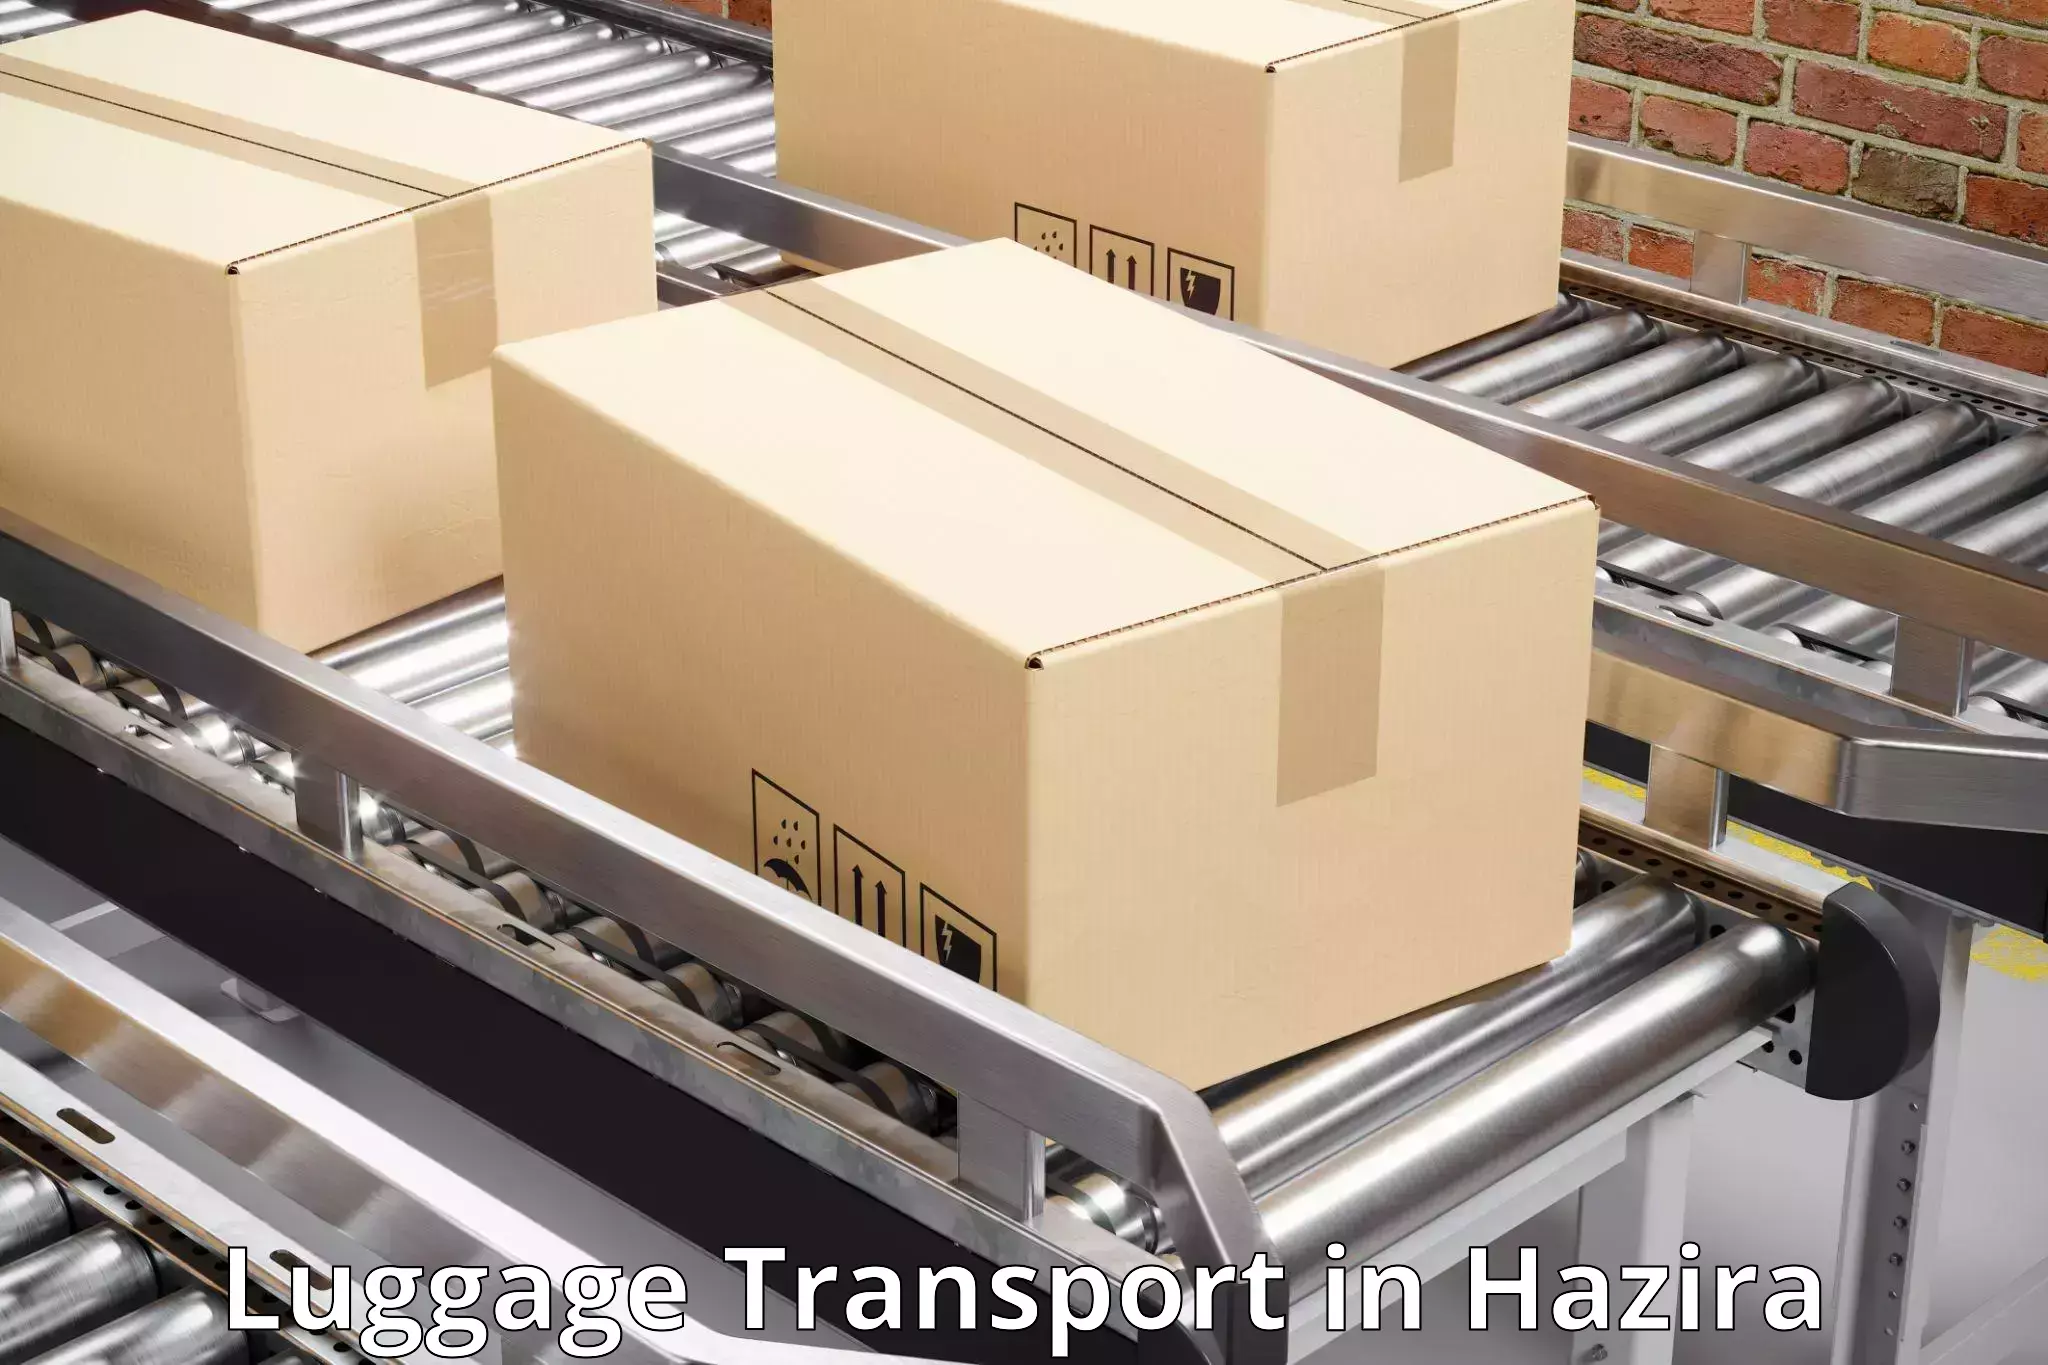 Online luggage shipping booking in Hazira